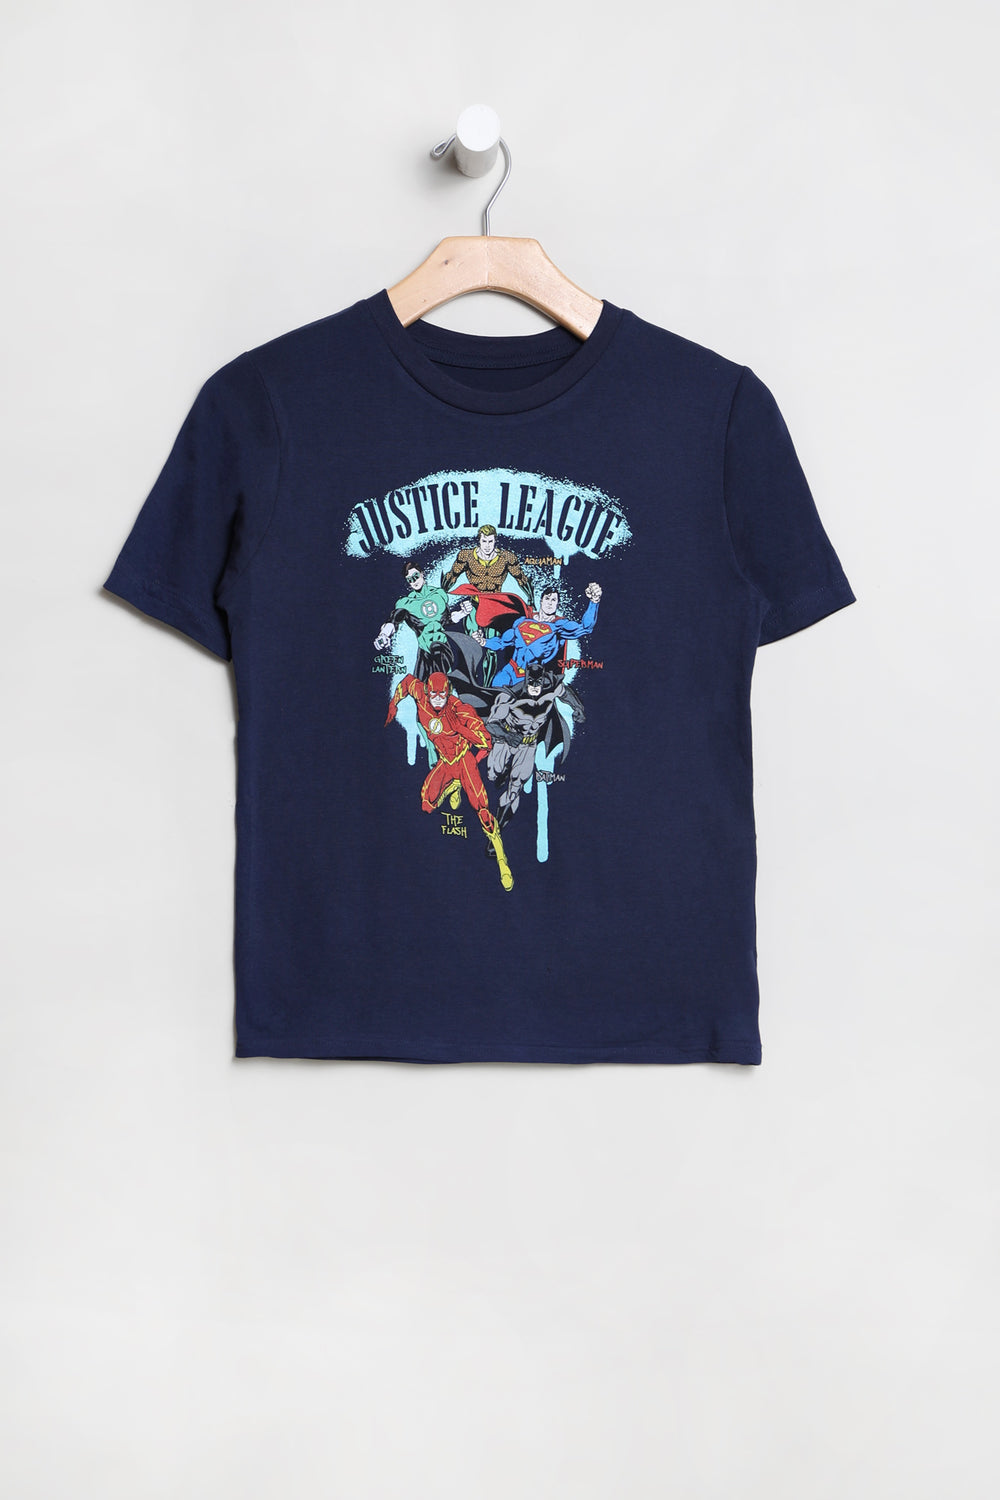 Youth Justice League Graphic T-Shirt Navy